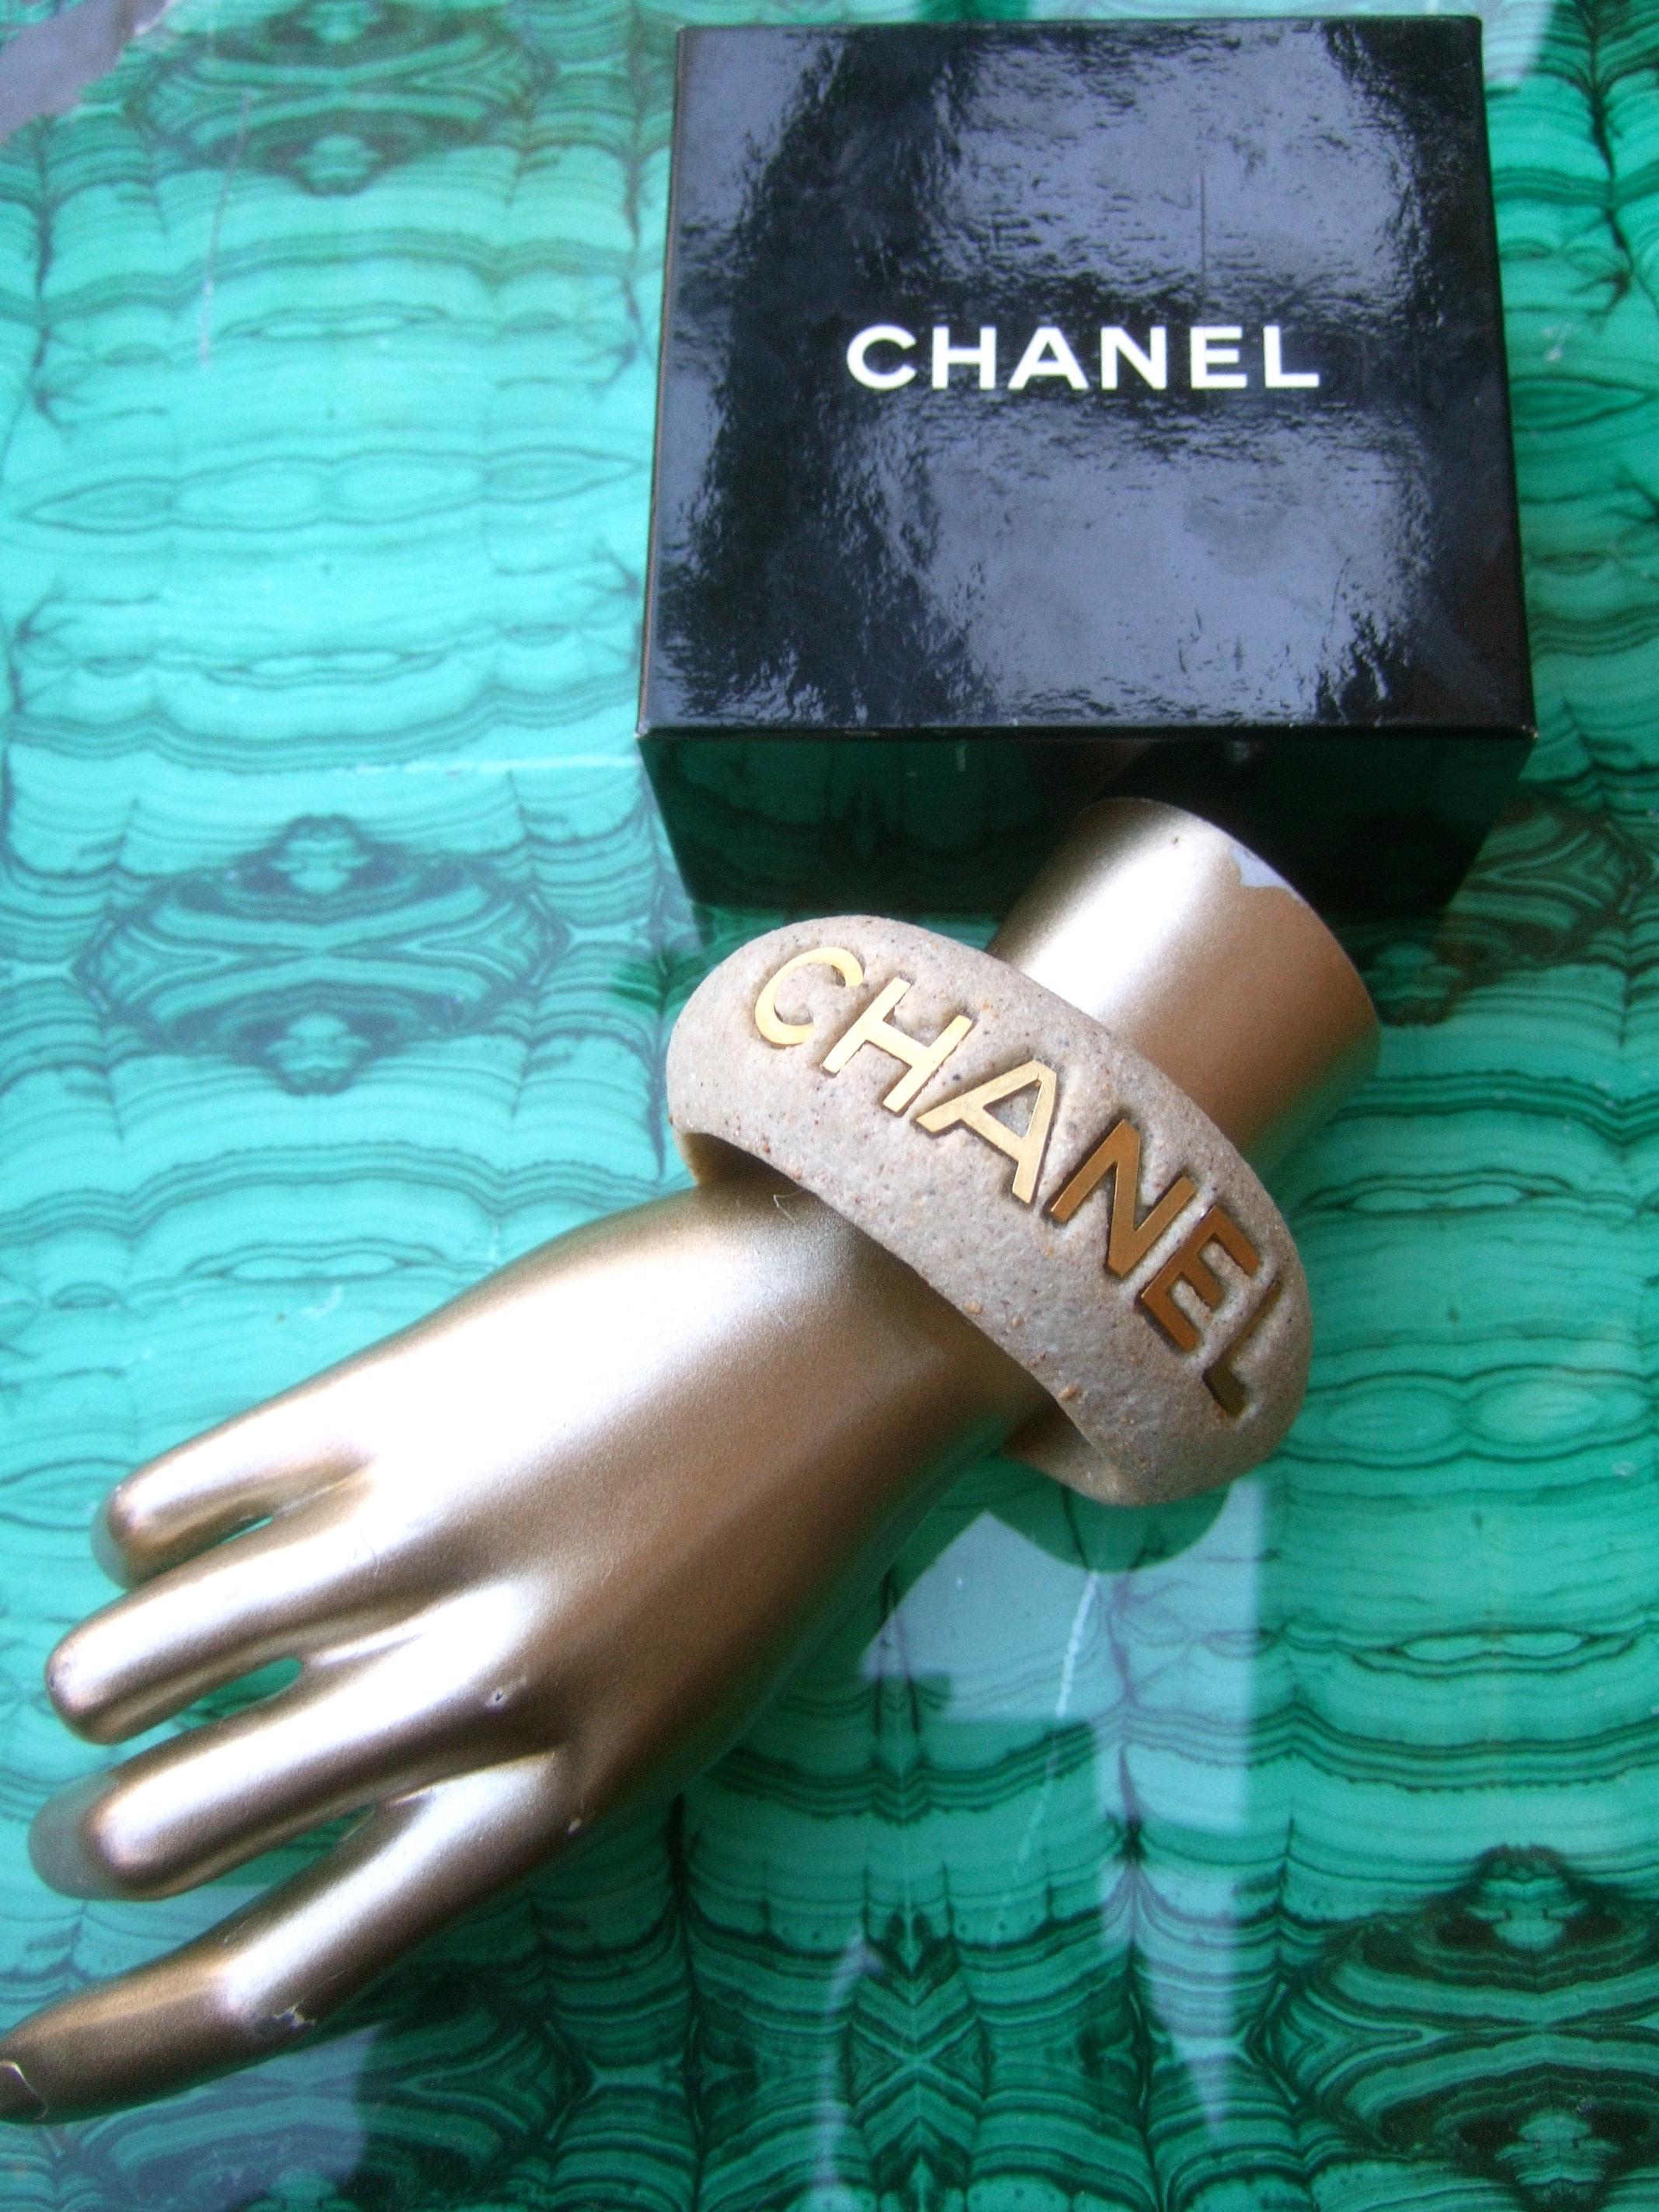 Chanel chic wide molded bisque stone cuff bracelet in Chanel presentation box c 1990s
The stylish Chanel cuff is designed with a textured stone bisque composition that resembles concrete
The bracelet is adorned with the Chanel name on one side in